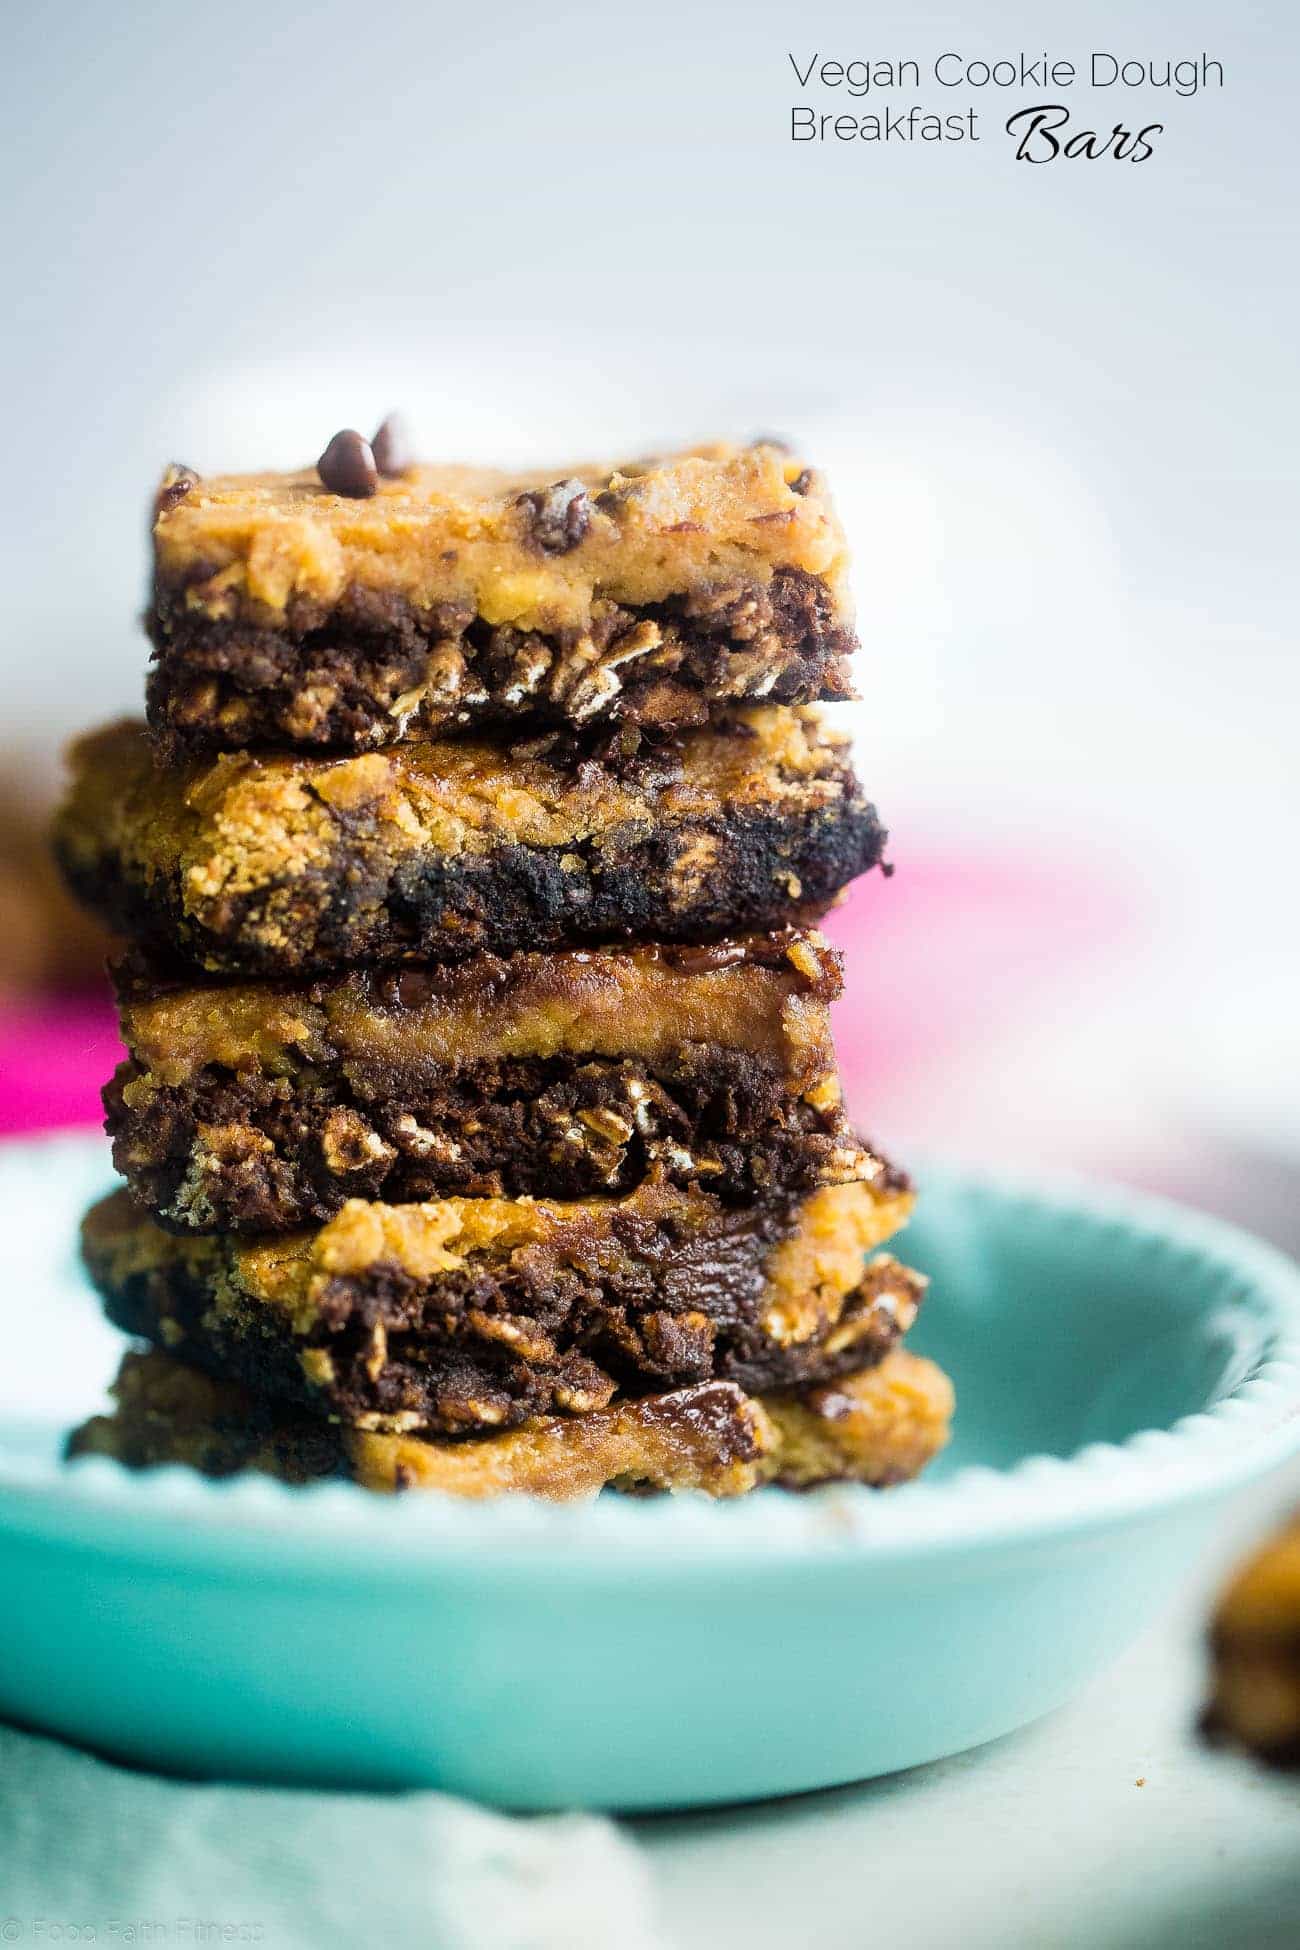 Vegan Cookie Dough Oatmeal Breakfast Bars - These gluten free breakfast bars let you feel like you're having dessert for breakfast! They're an easy, portable option to have for busy mornings! Great for meal prep! | Foodfaithfitness.com | @FoodFaithF